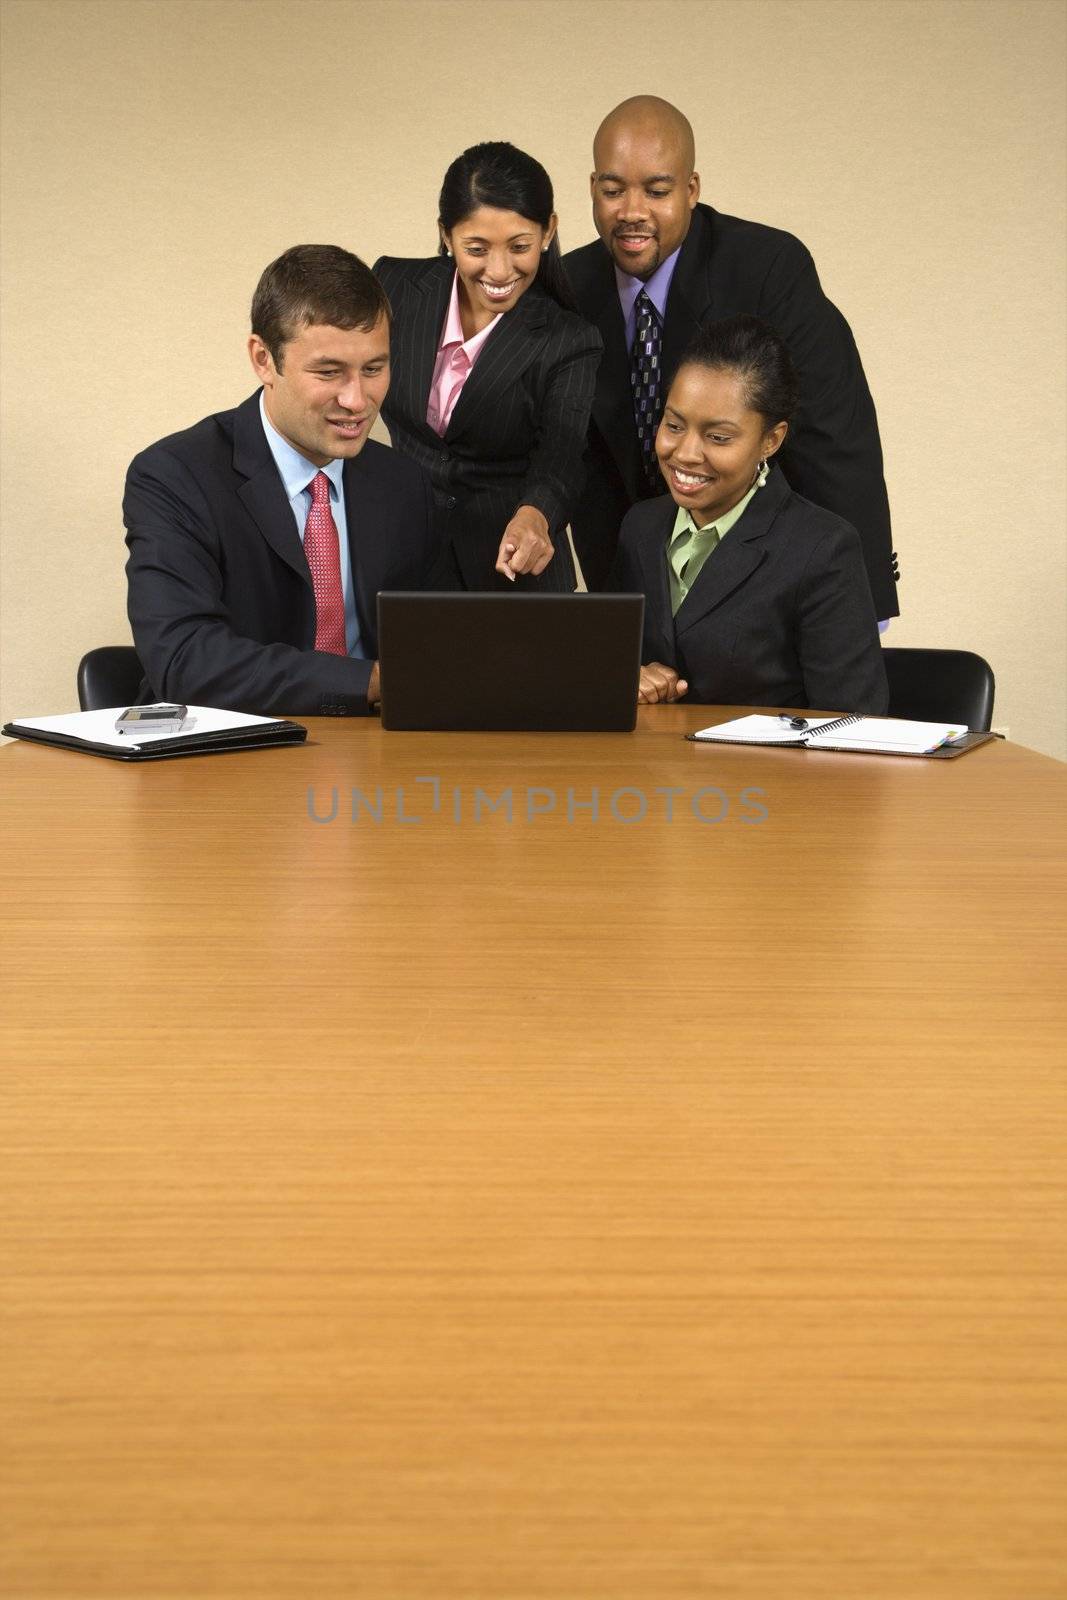 Businesspeople gathered around laptop computer looking at monitor and smiling.